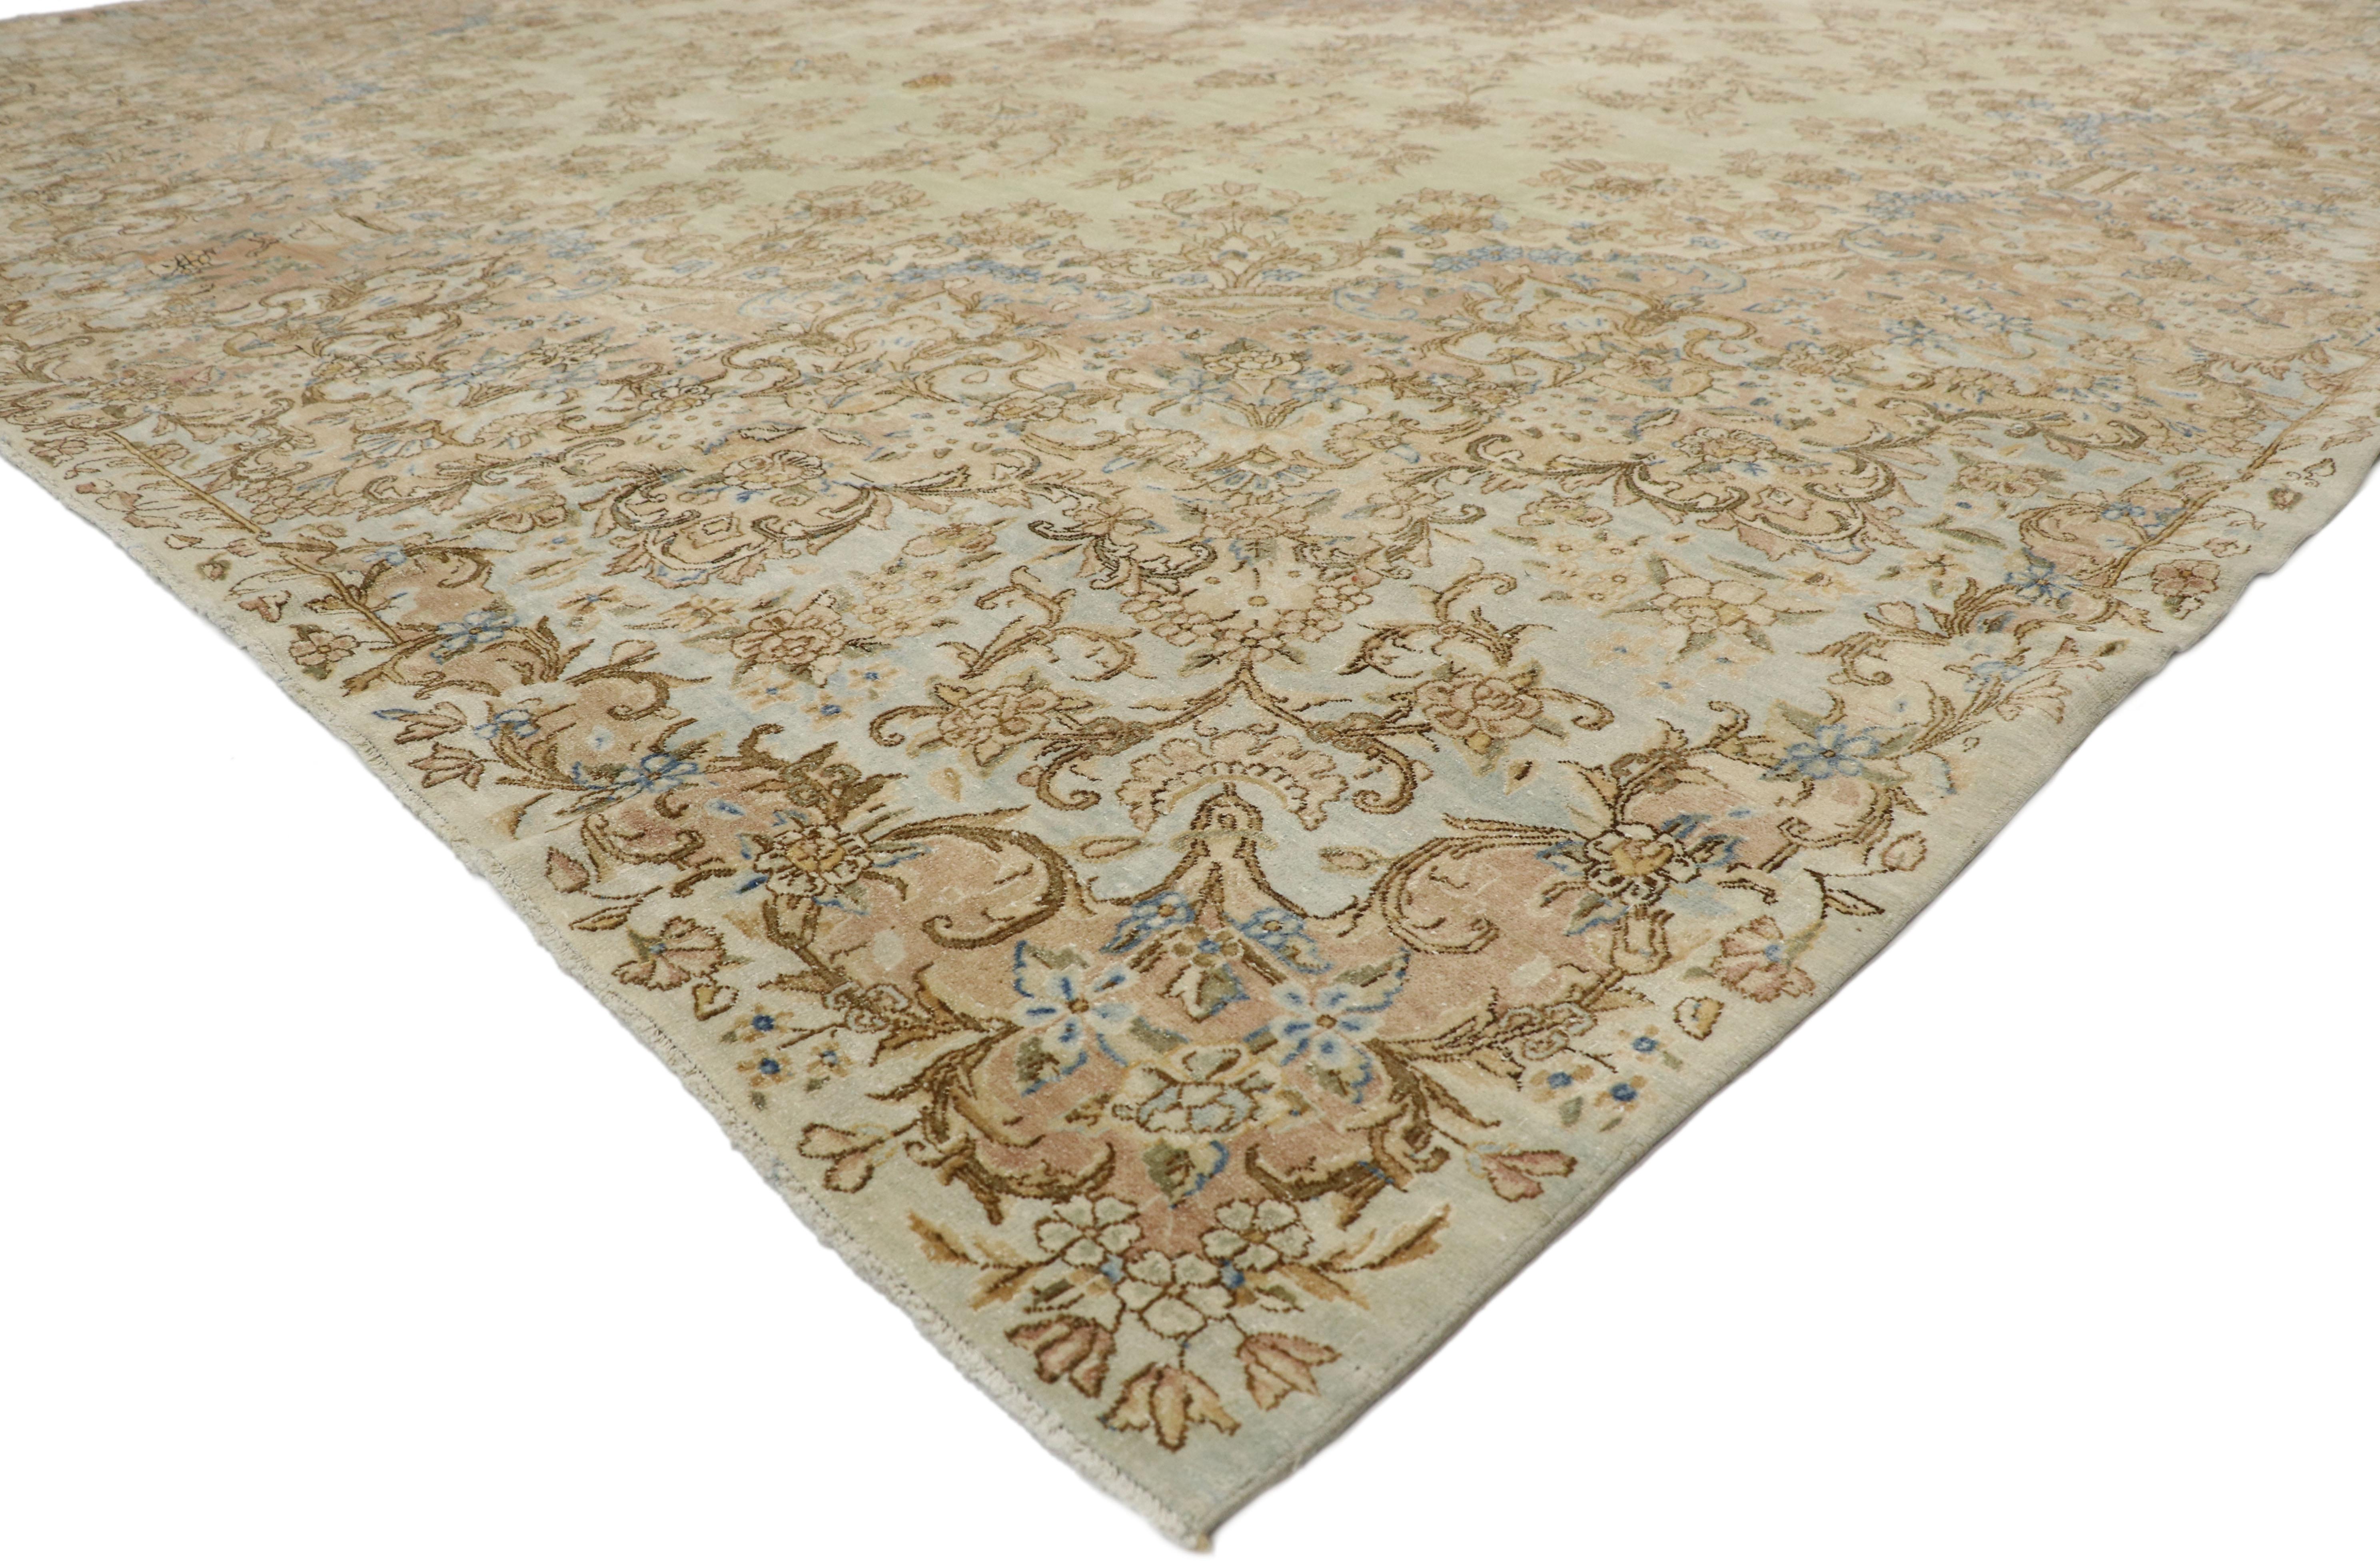 73493, distressed antique Persian Kerman rug with French Provincial and Georgian style. With an impressive array of realistic floral elements and lovingly timeworn appearance combined with harmonious and subtle hues, this hand knotted wool